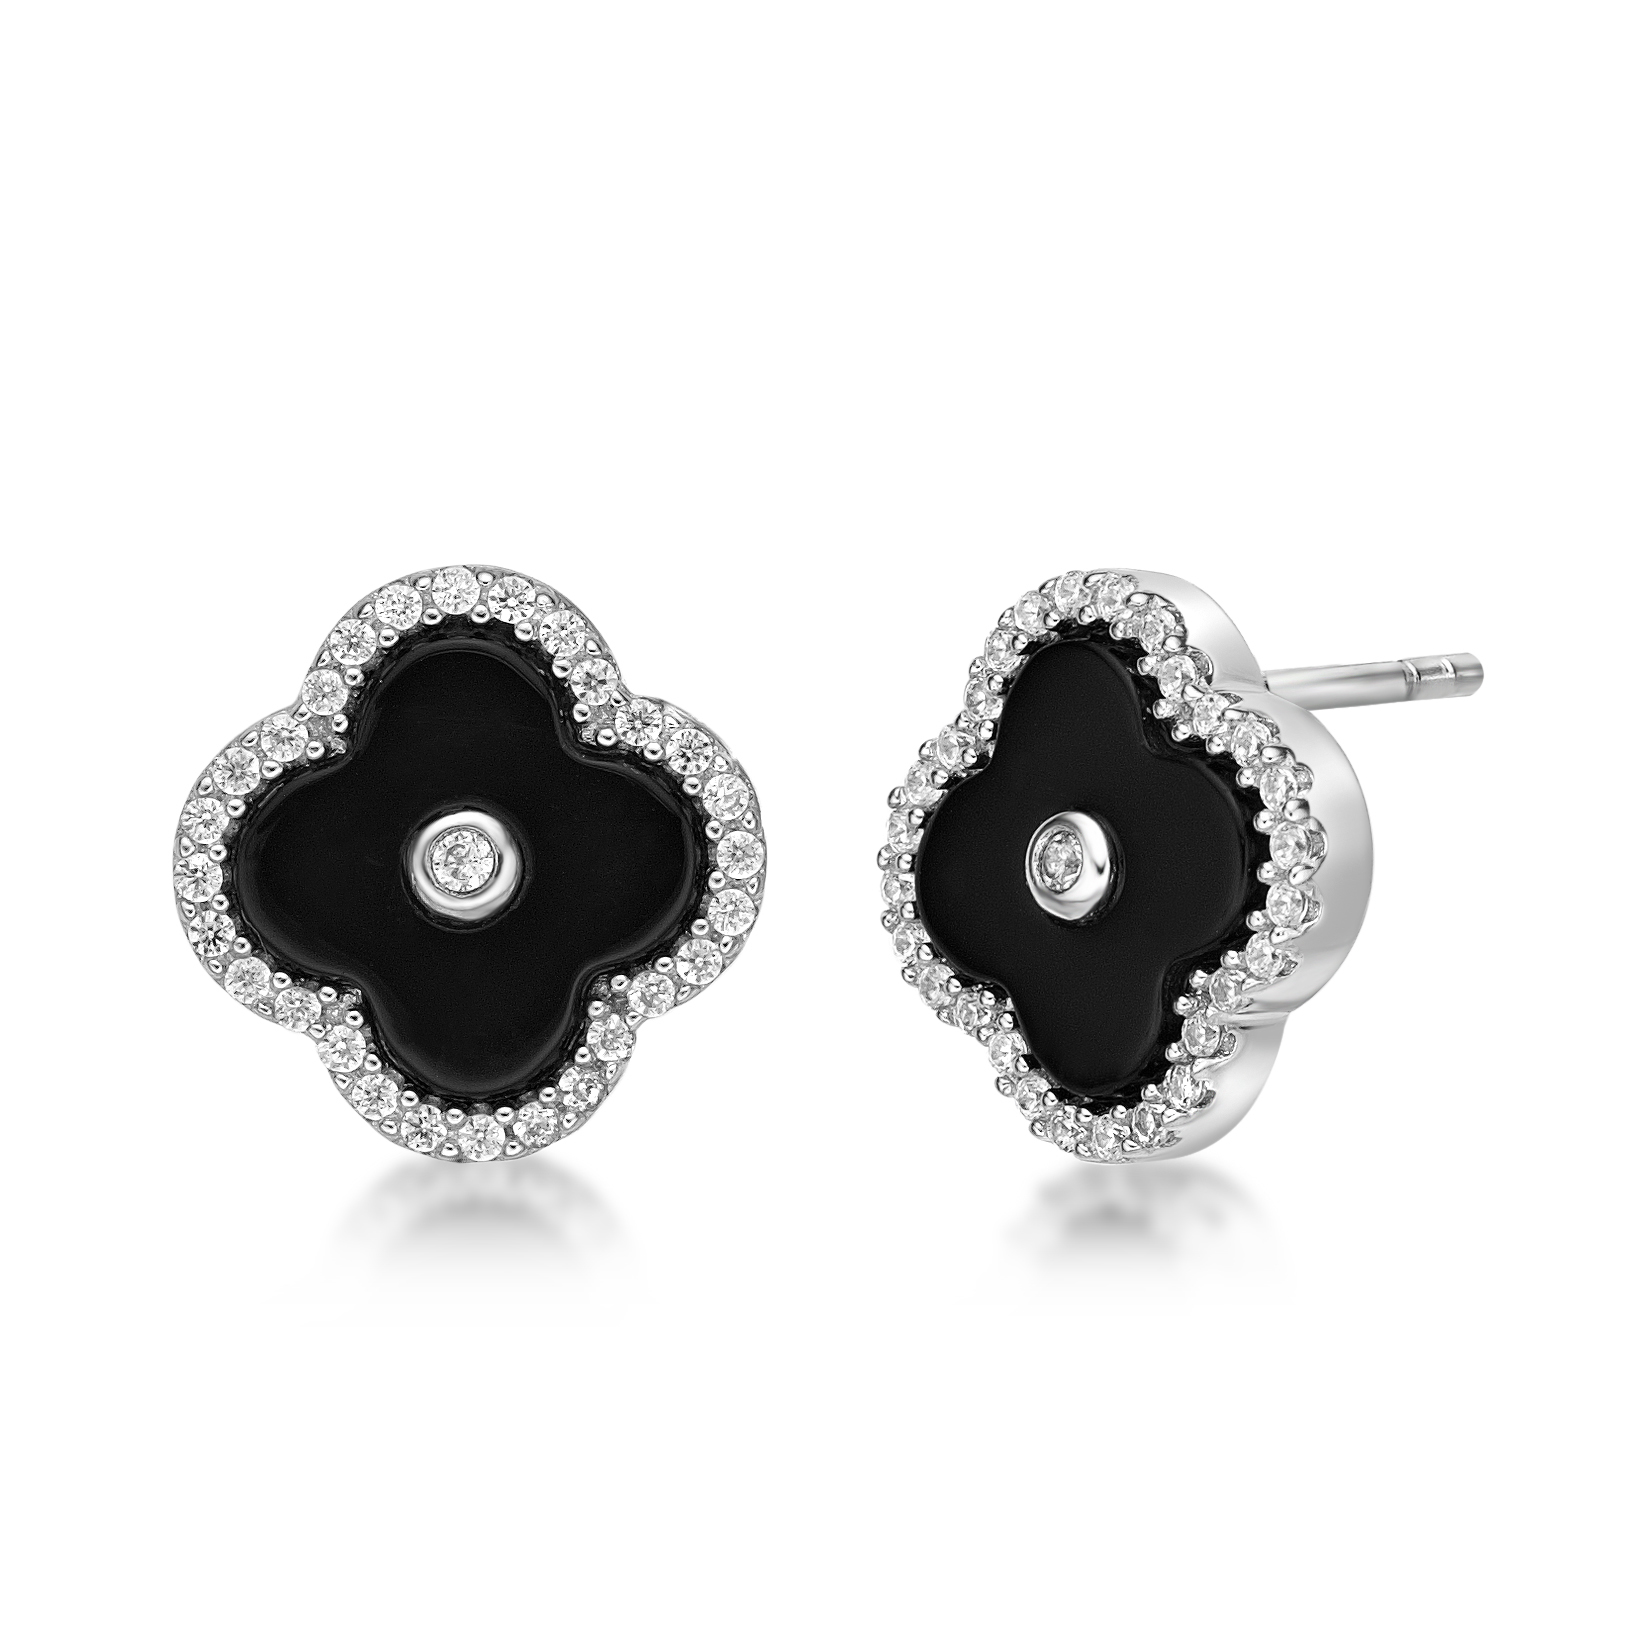 Post Style Earrings Sterling Silver Setting With Black Onyx 